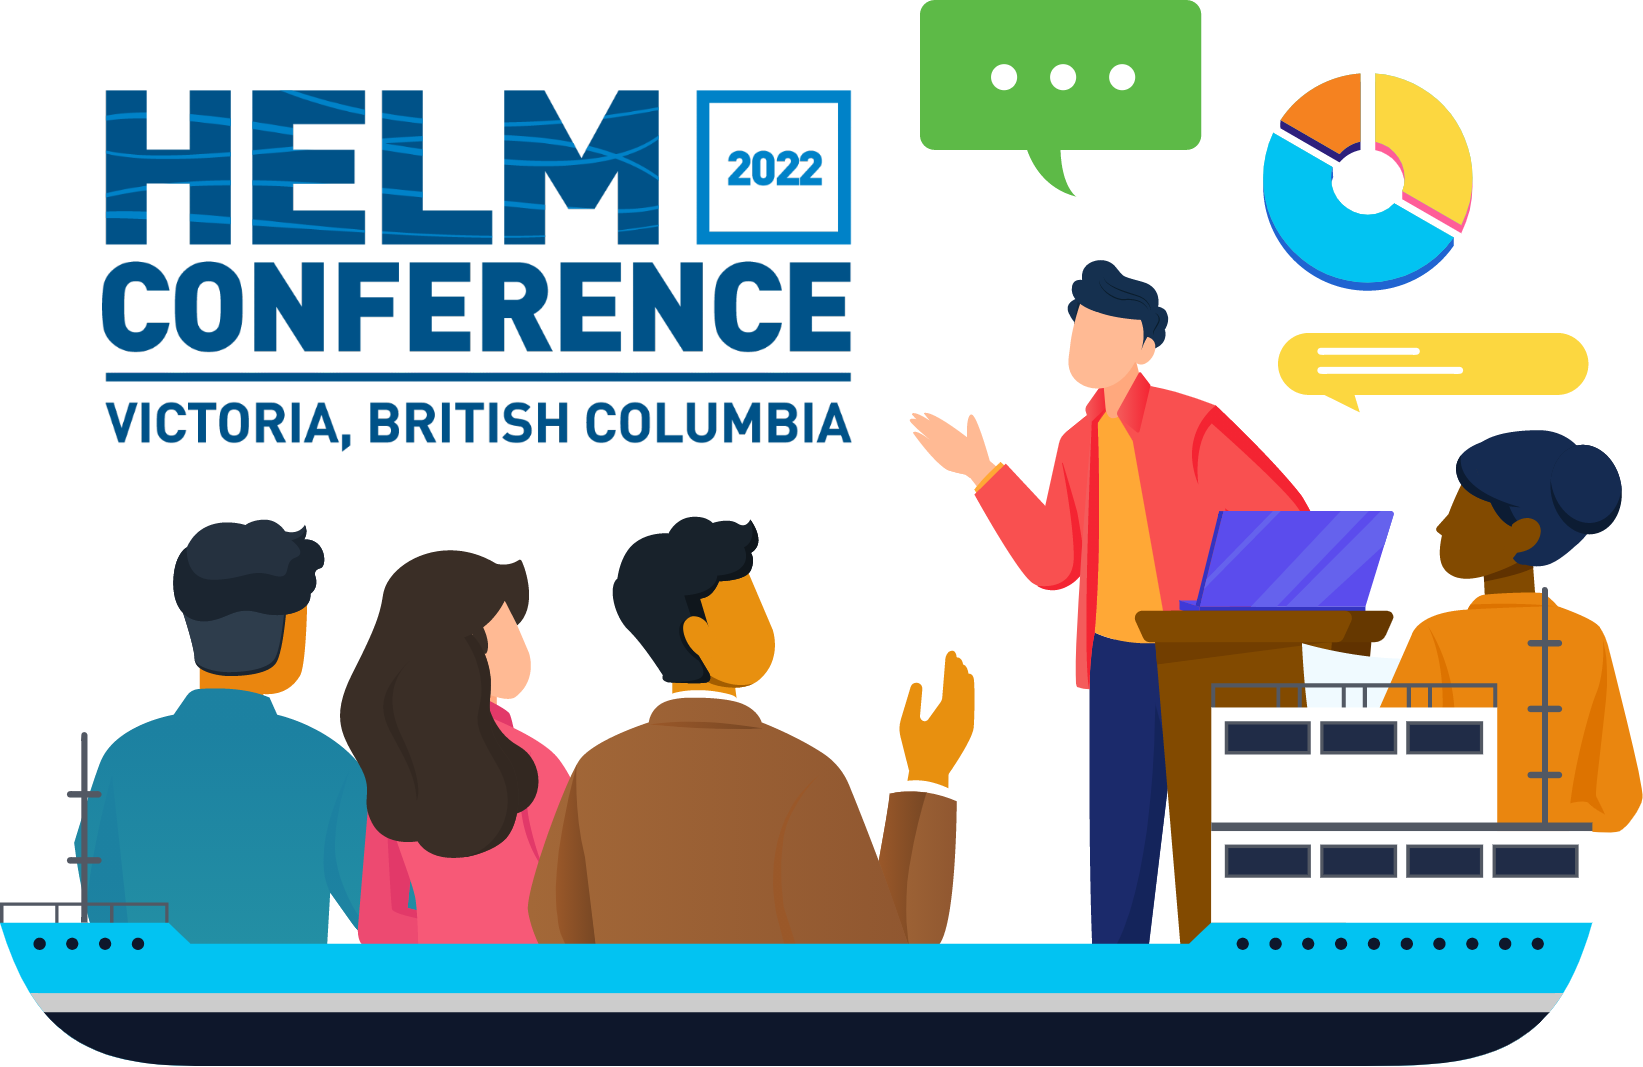 Helm Conference 2022